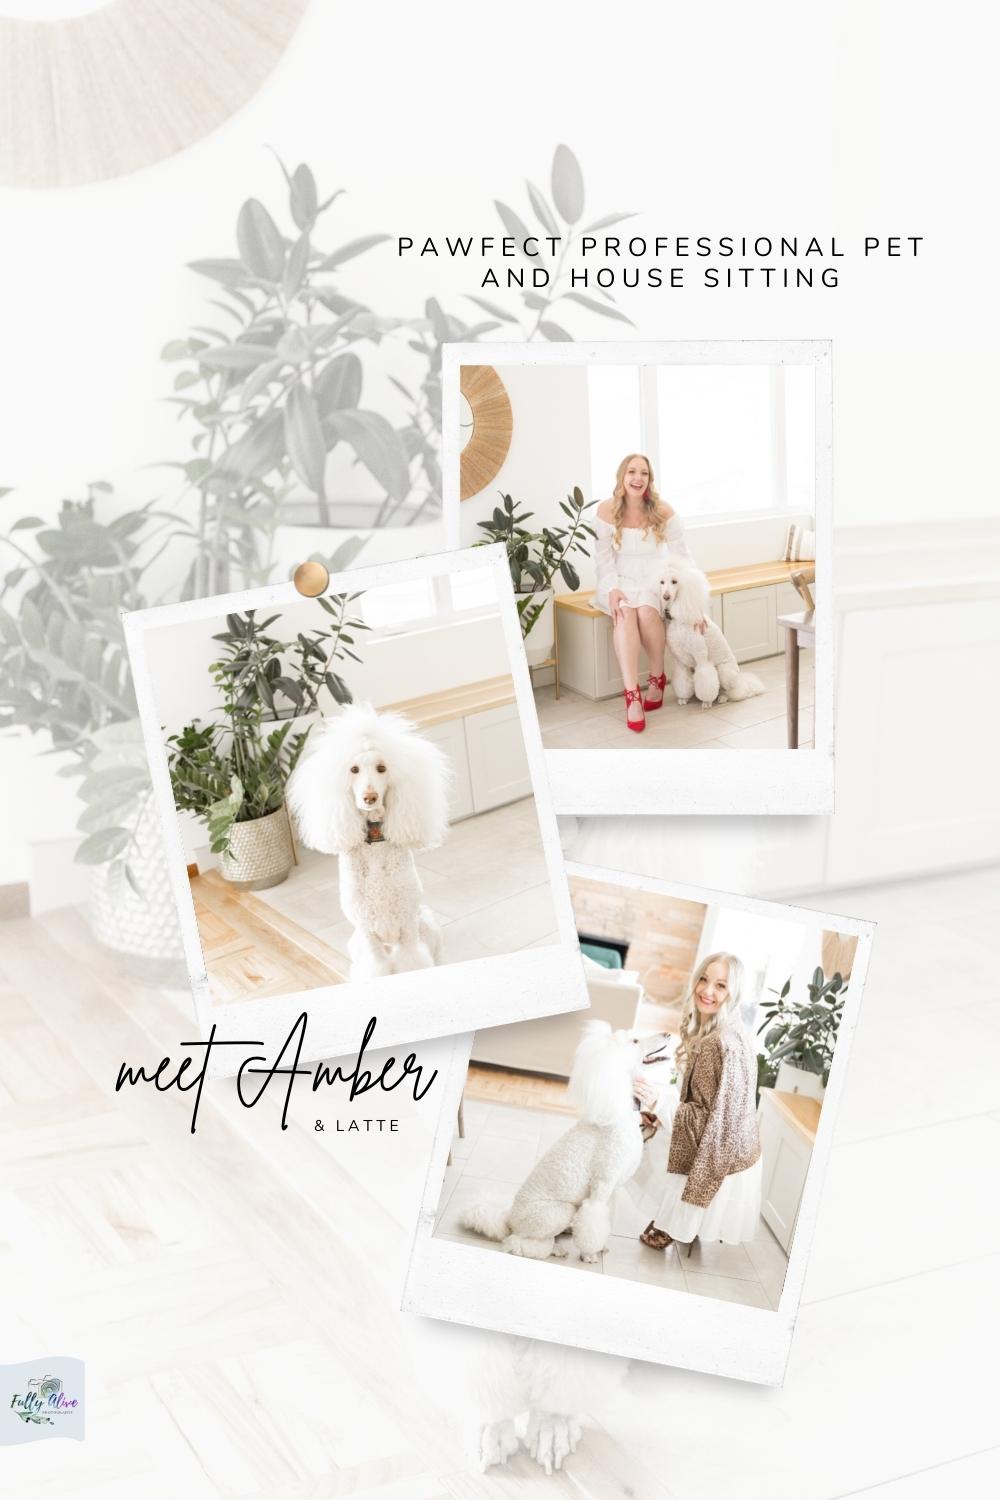 Meet Amber Of Pawfect Professional Pet and House Sitting